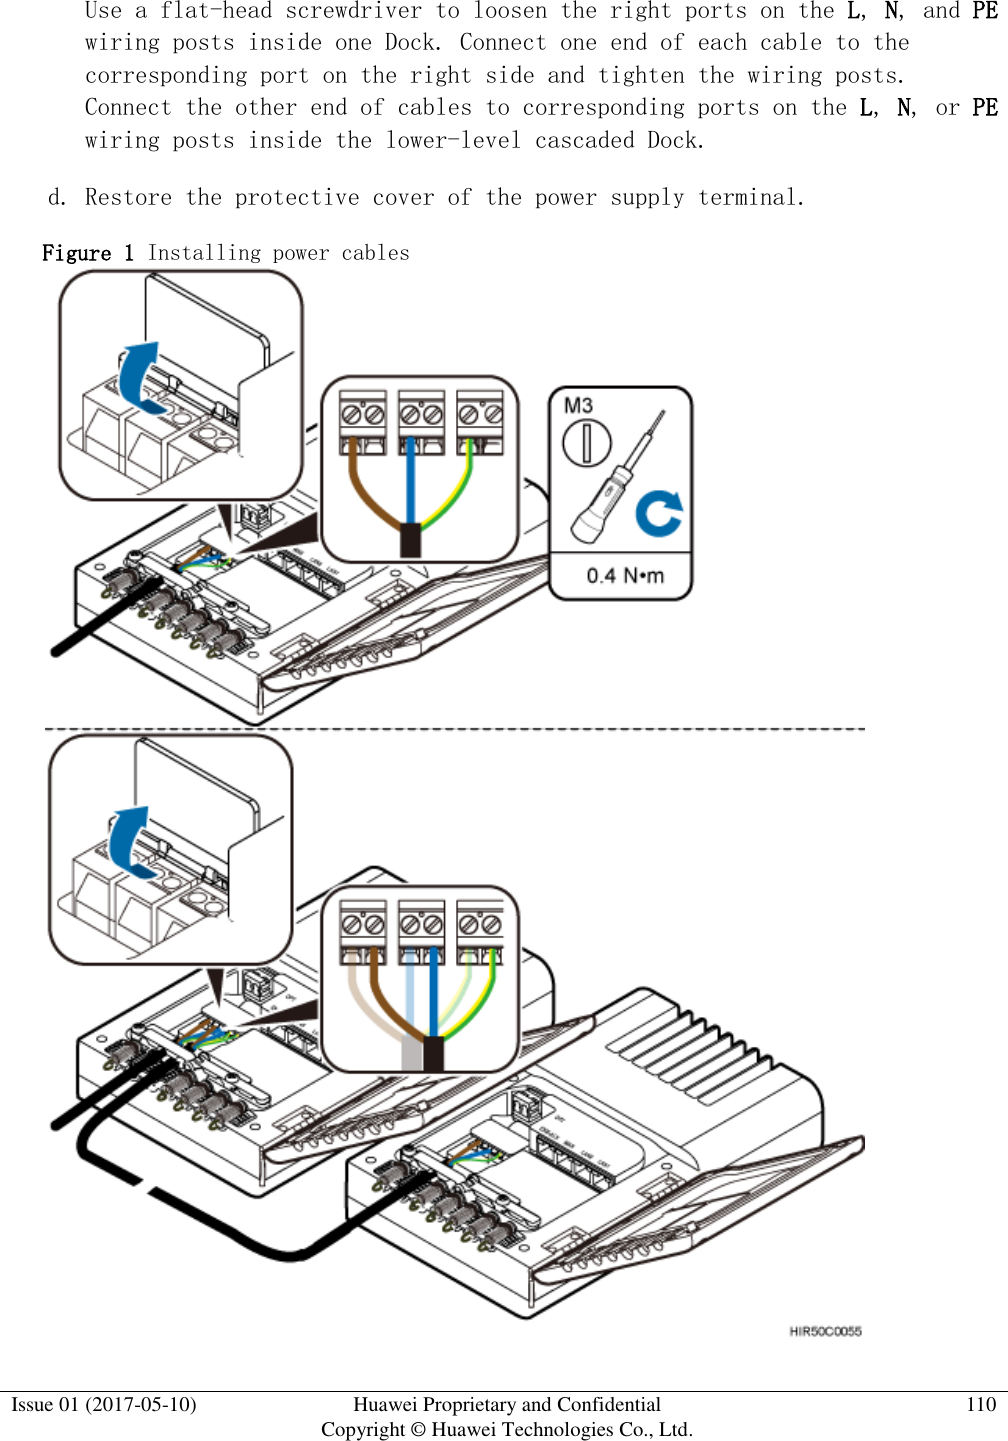  Issue 01 (2017-05-10) Huawei Proprietary and Confidential      Copyright © Huawei Technologies Co., Ltd. 110  Use a flat-head screwdriver to loosen the right ports on the L, N, and PE wiring posts inside one Dock. Connect one end of each cable to the corresponding port on the right side and tighten the wiring posts. Connect the other end of cables to corresponding ports on the L, N, or PE wiring posts inside the lower-level cascaded Dock.  d. Restore the protective cover of the power supply terminal.  Figure 1 Installing power cables   